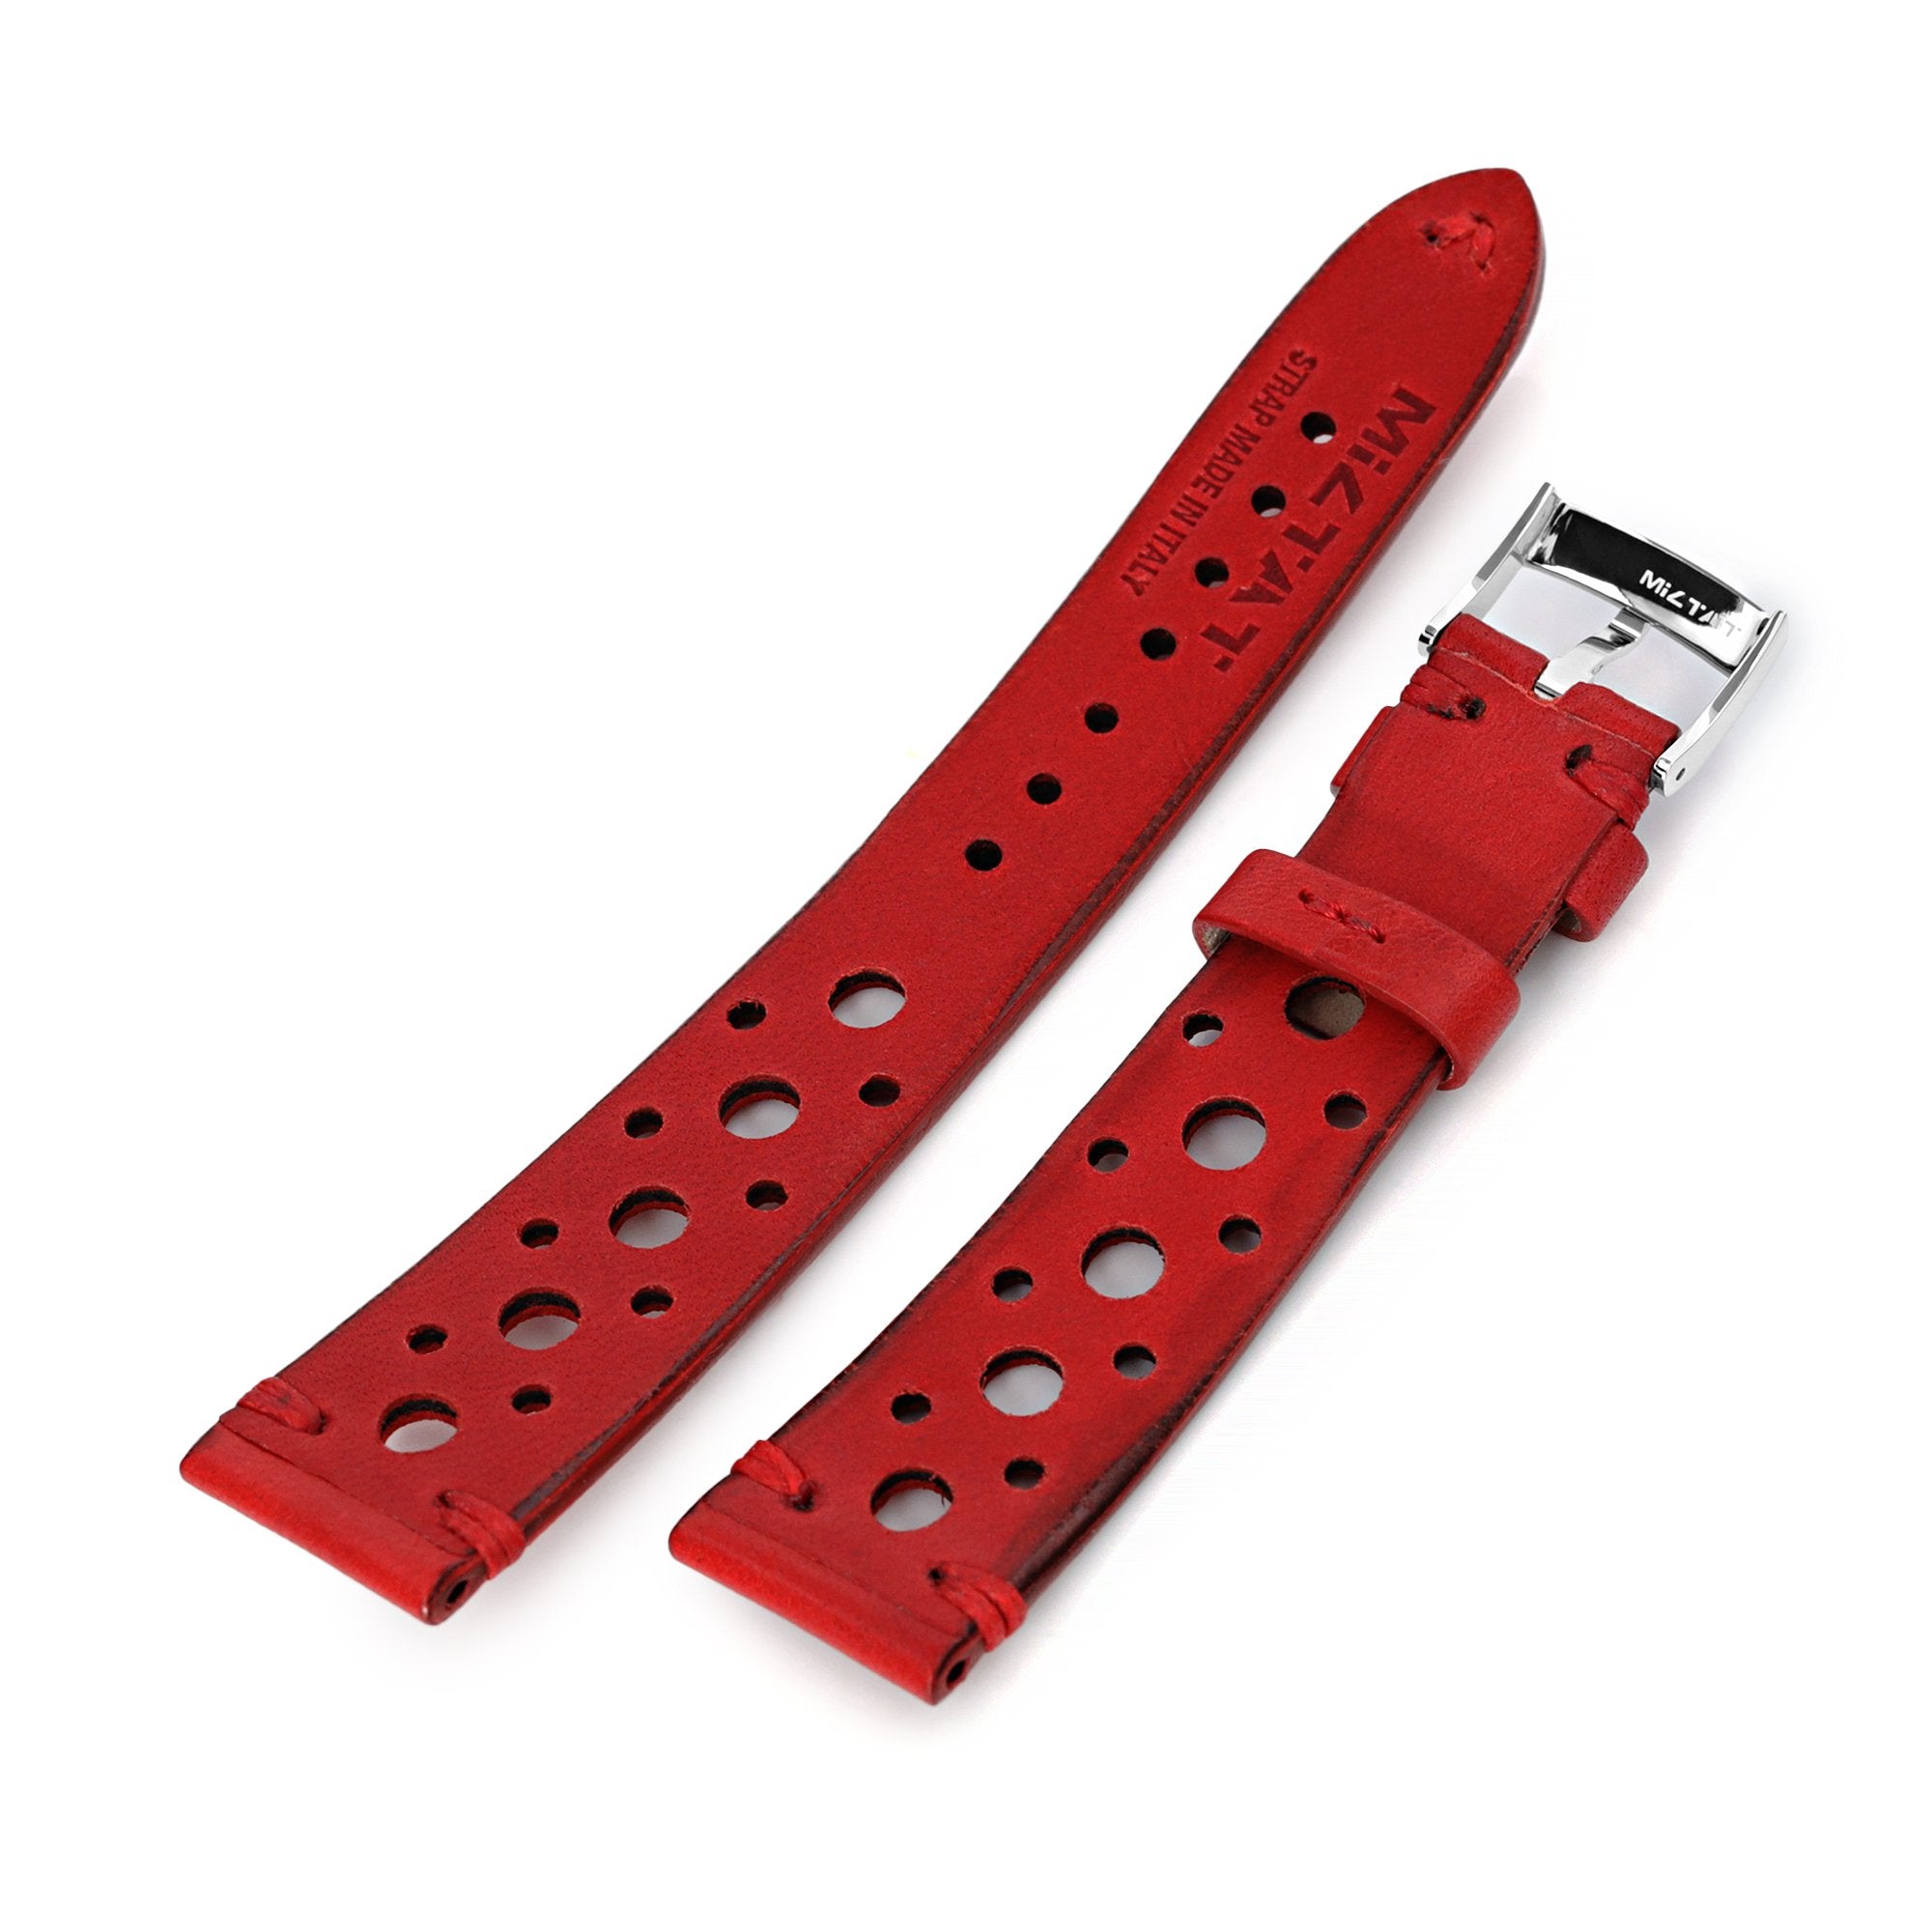 20mm Red Italian Handmade Racer Watch Band, P Buckle Strapcode Watch Bands